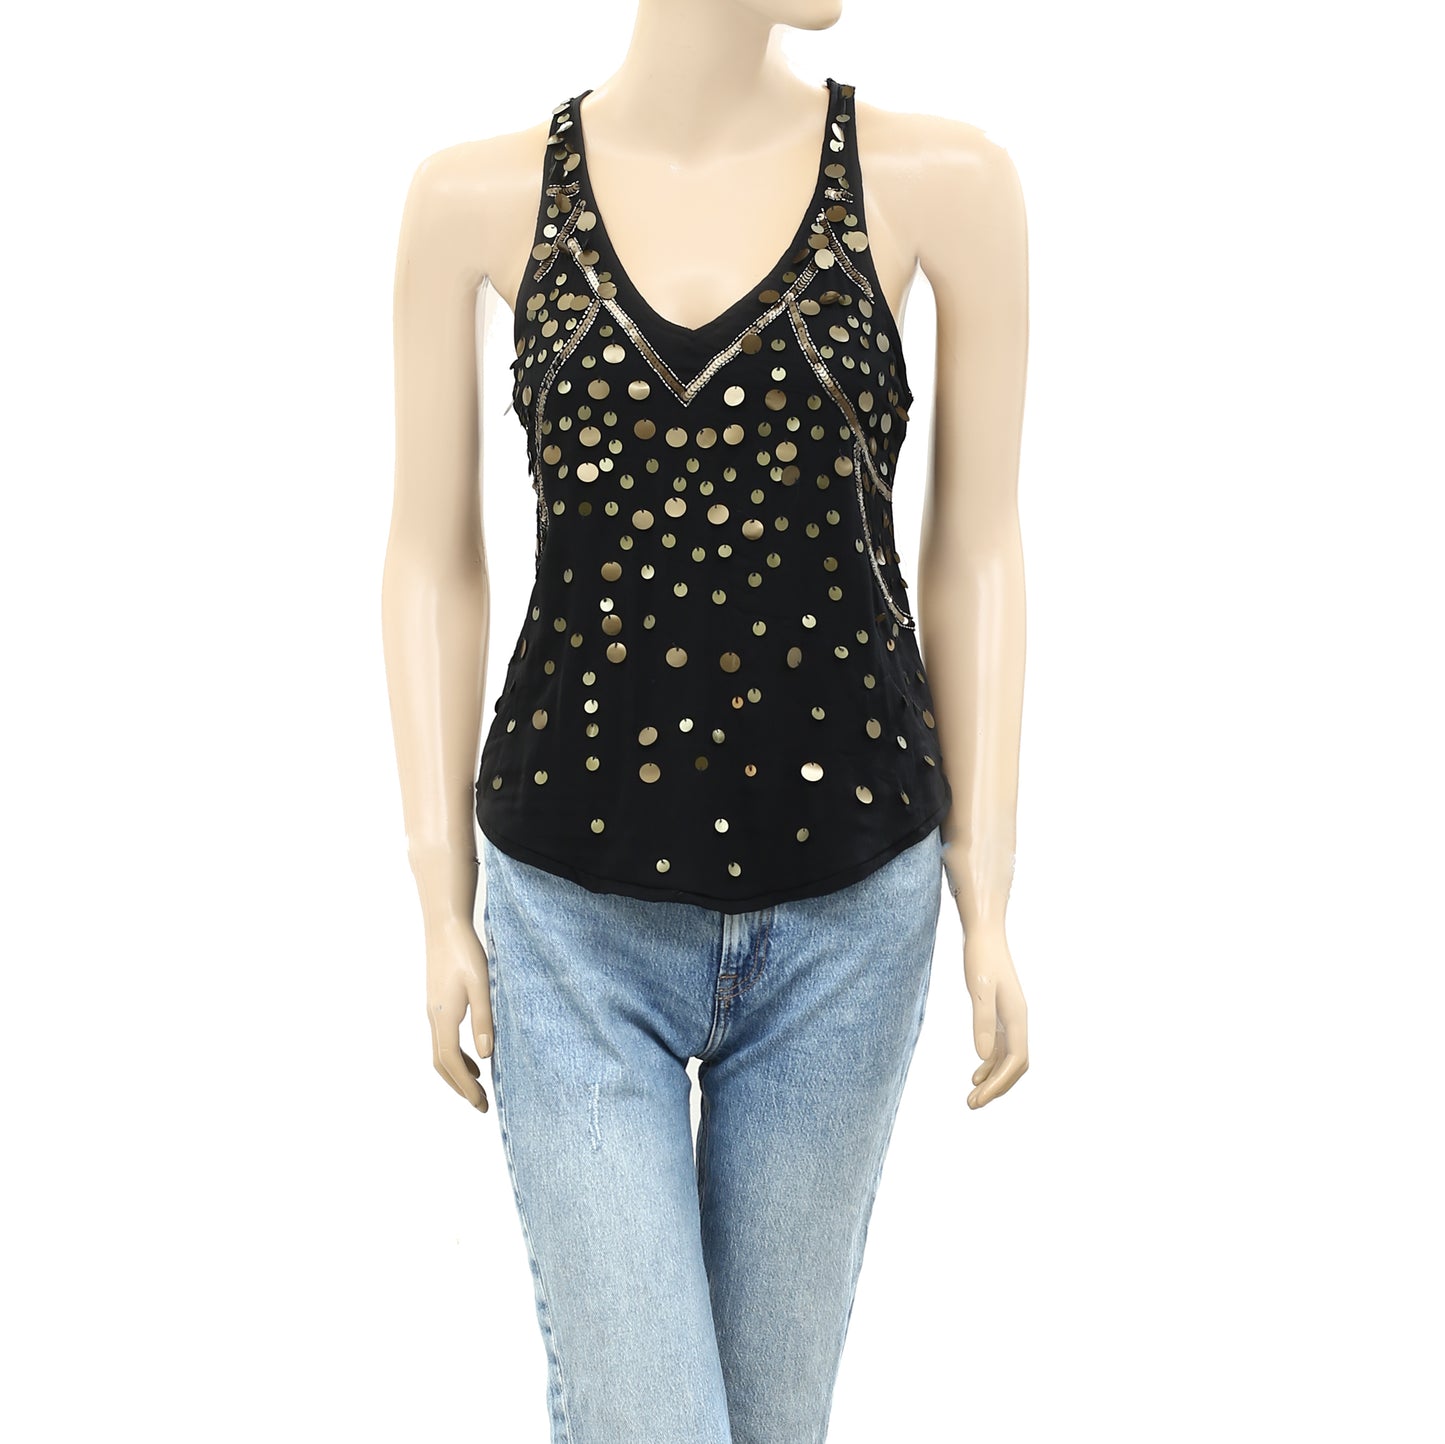 Ecote Urban Outfitters Sequin Embellished Tank Blouse Top XS